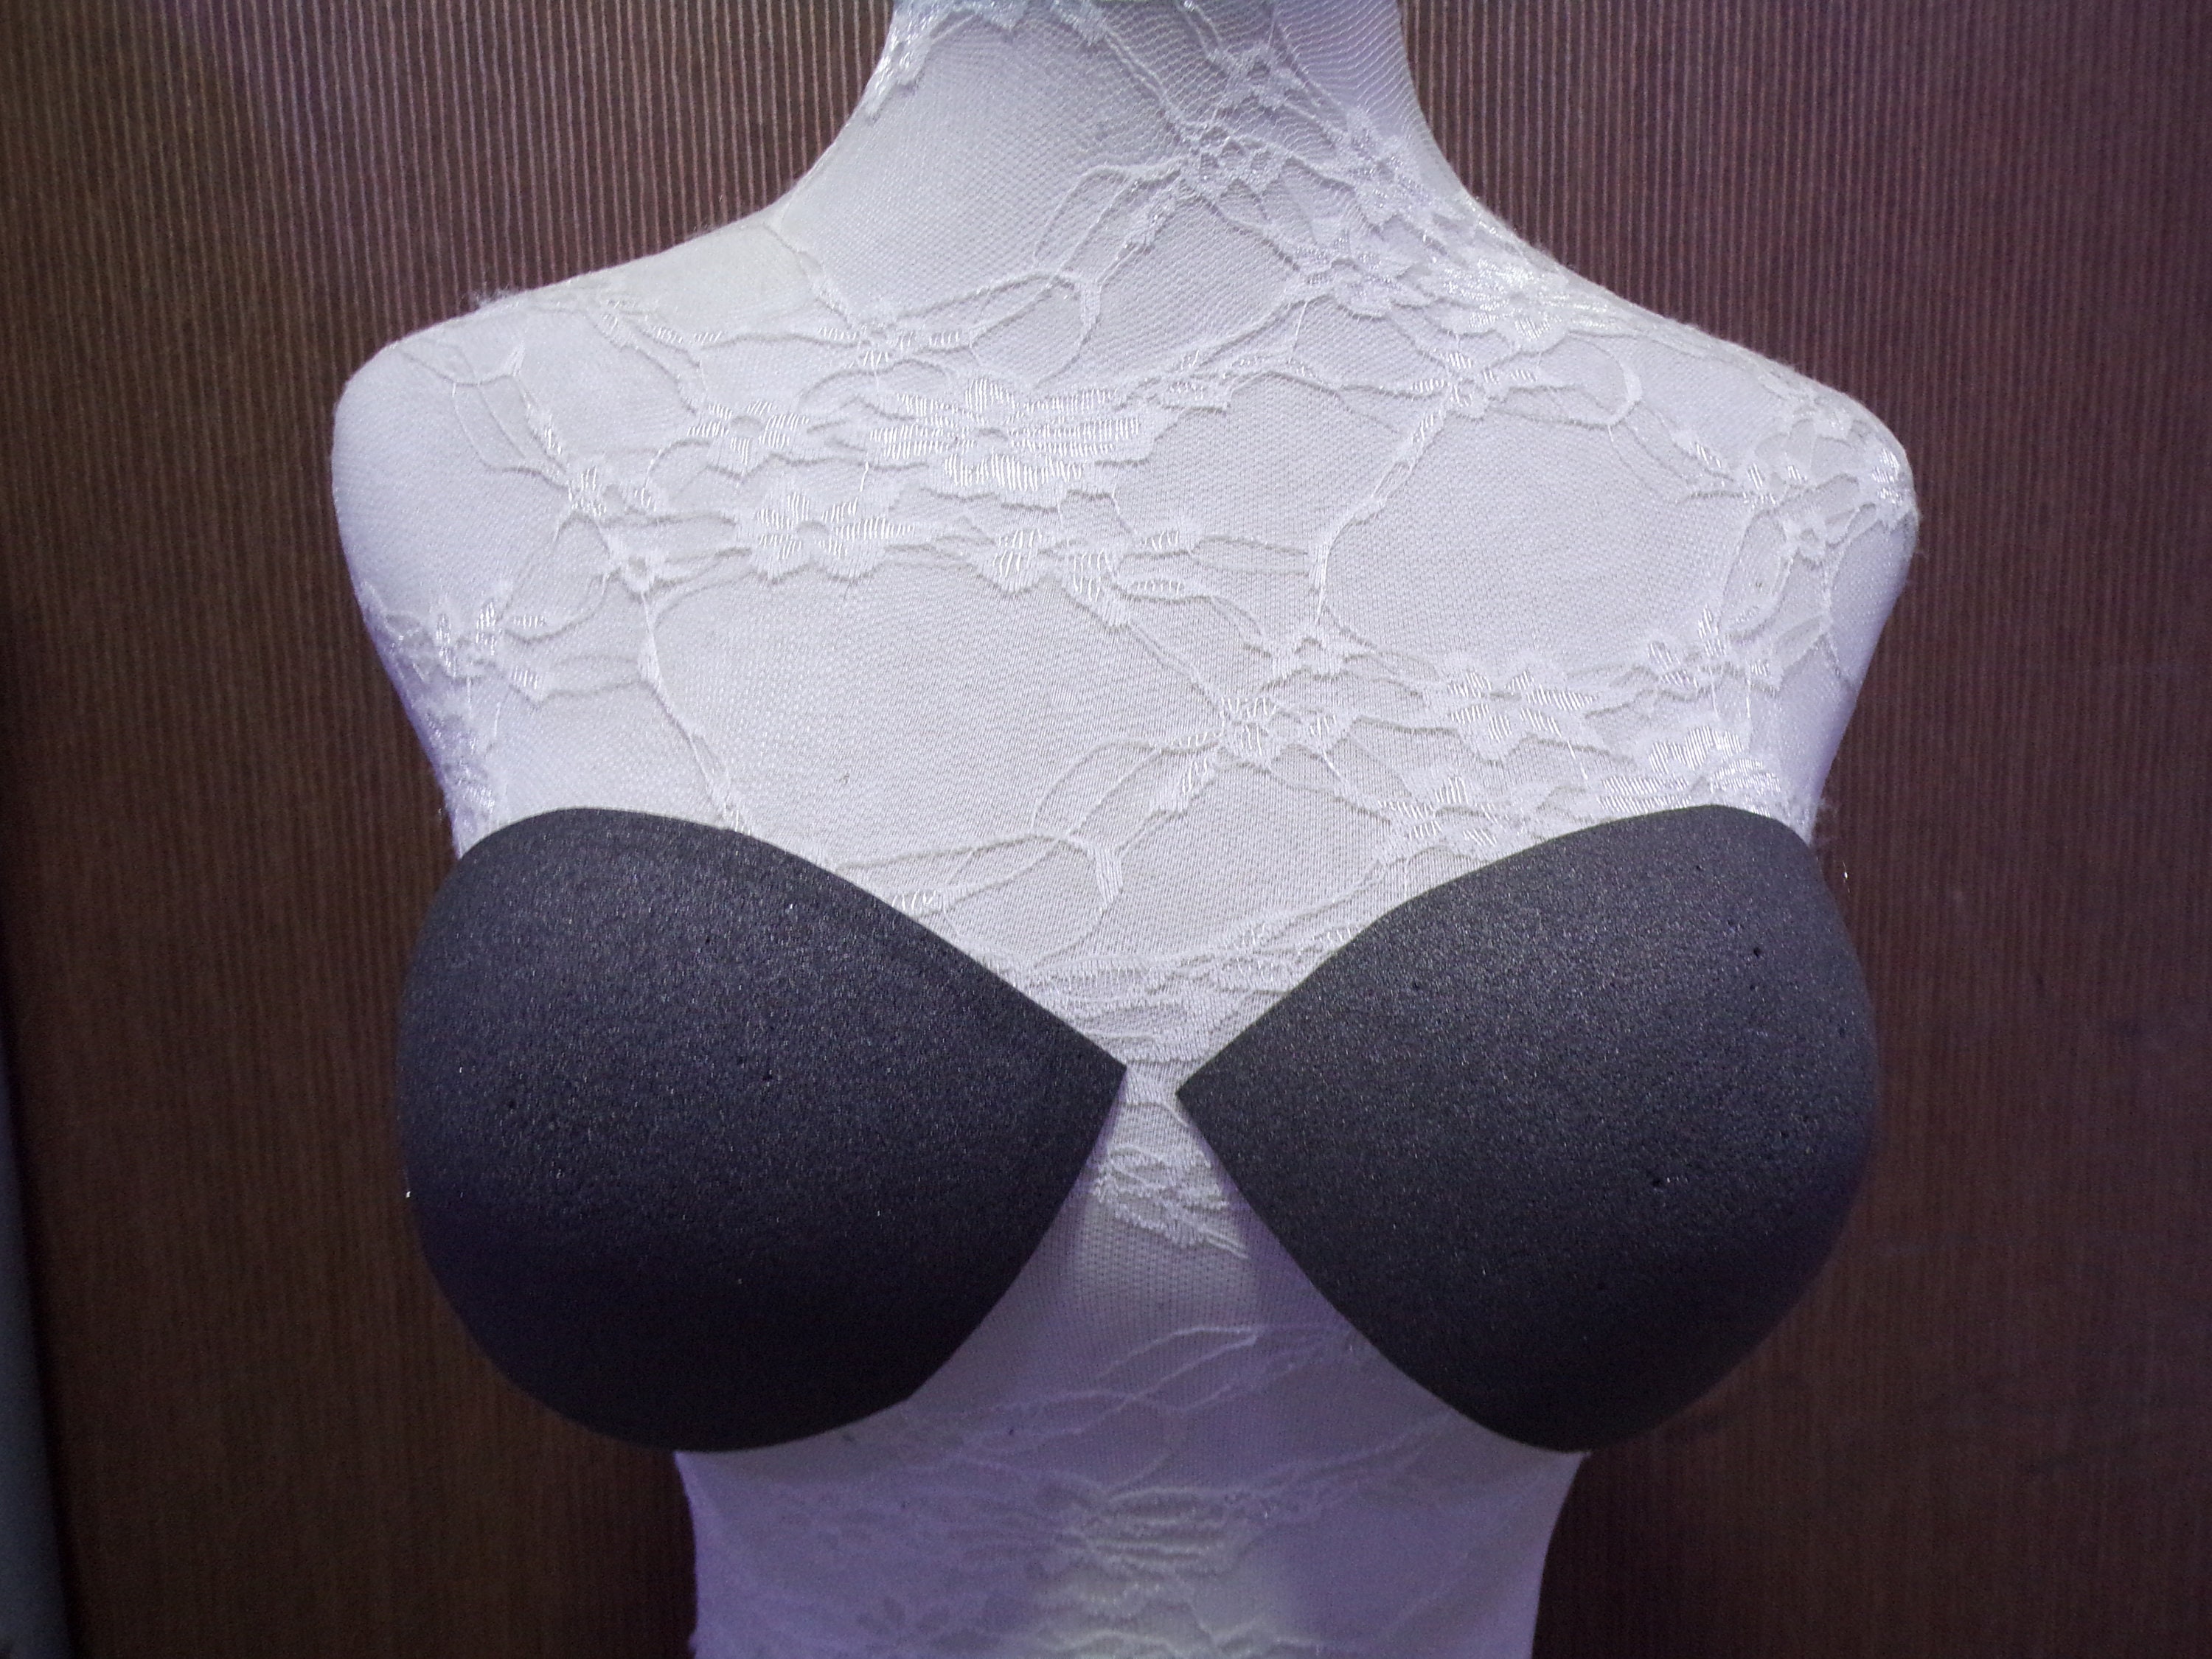 Sew-in Teardrop Bra Cups Pads Inserts - 1 pair Size Small (Cup Size A/B)  M408.05